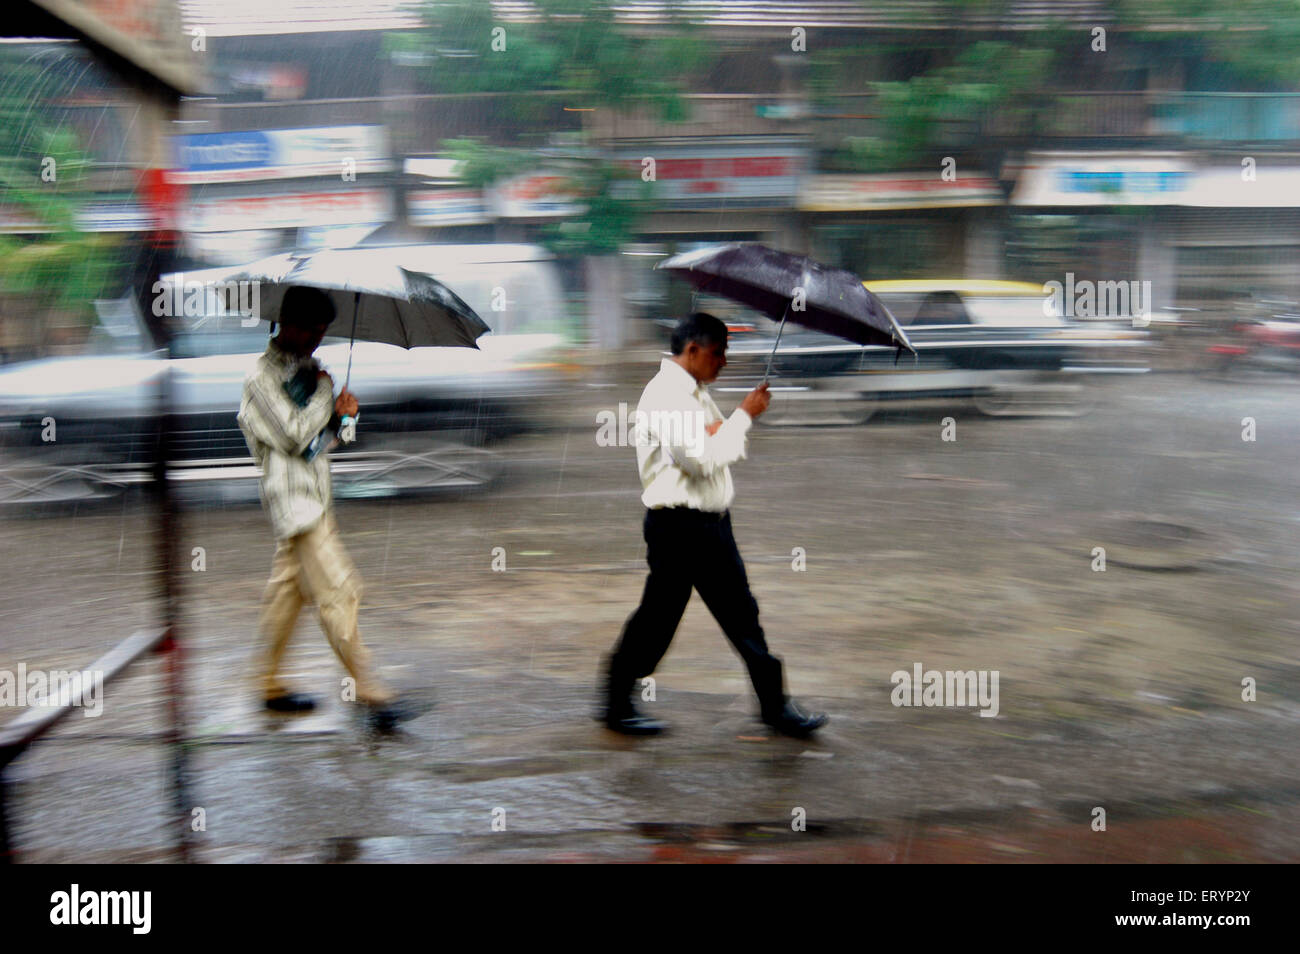 Commuters protect themselves with their umbrellas as they walk in heavy rains during monsoon season in Bombay Stock Photo